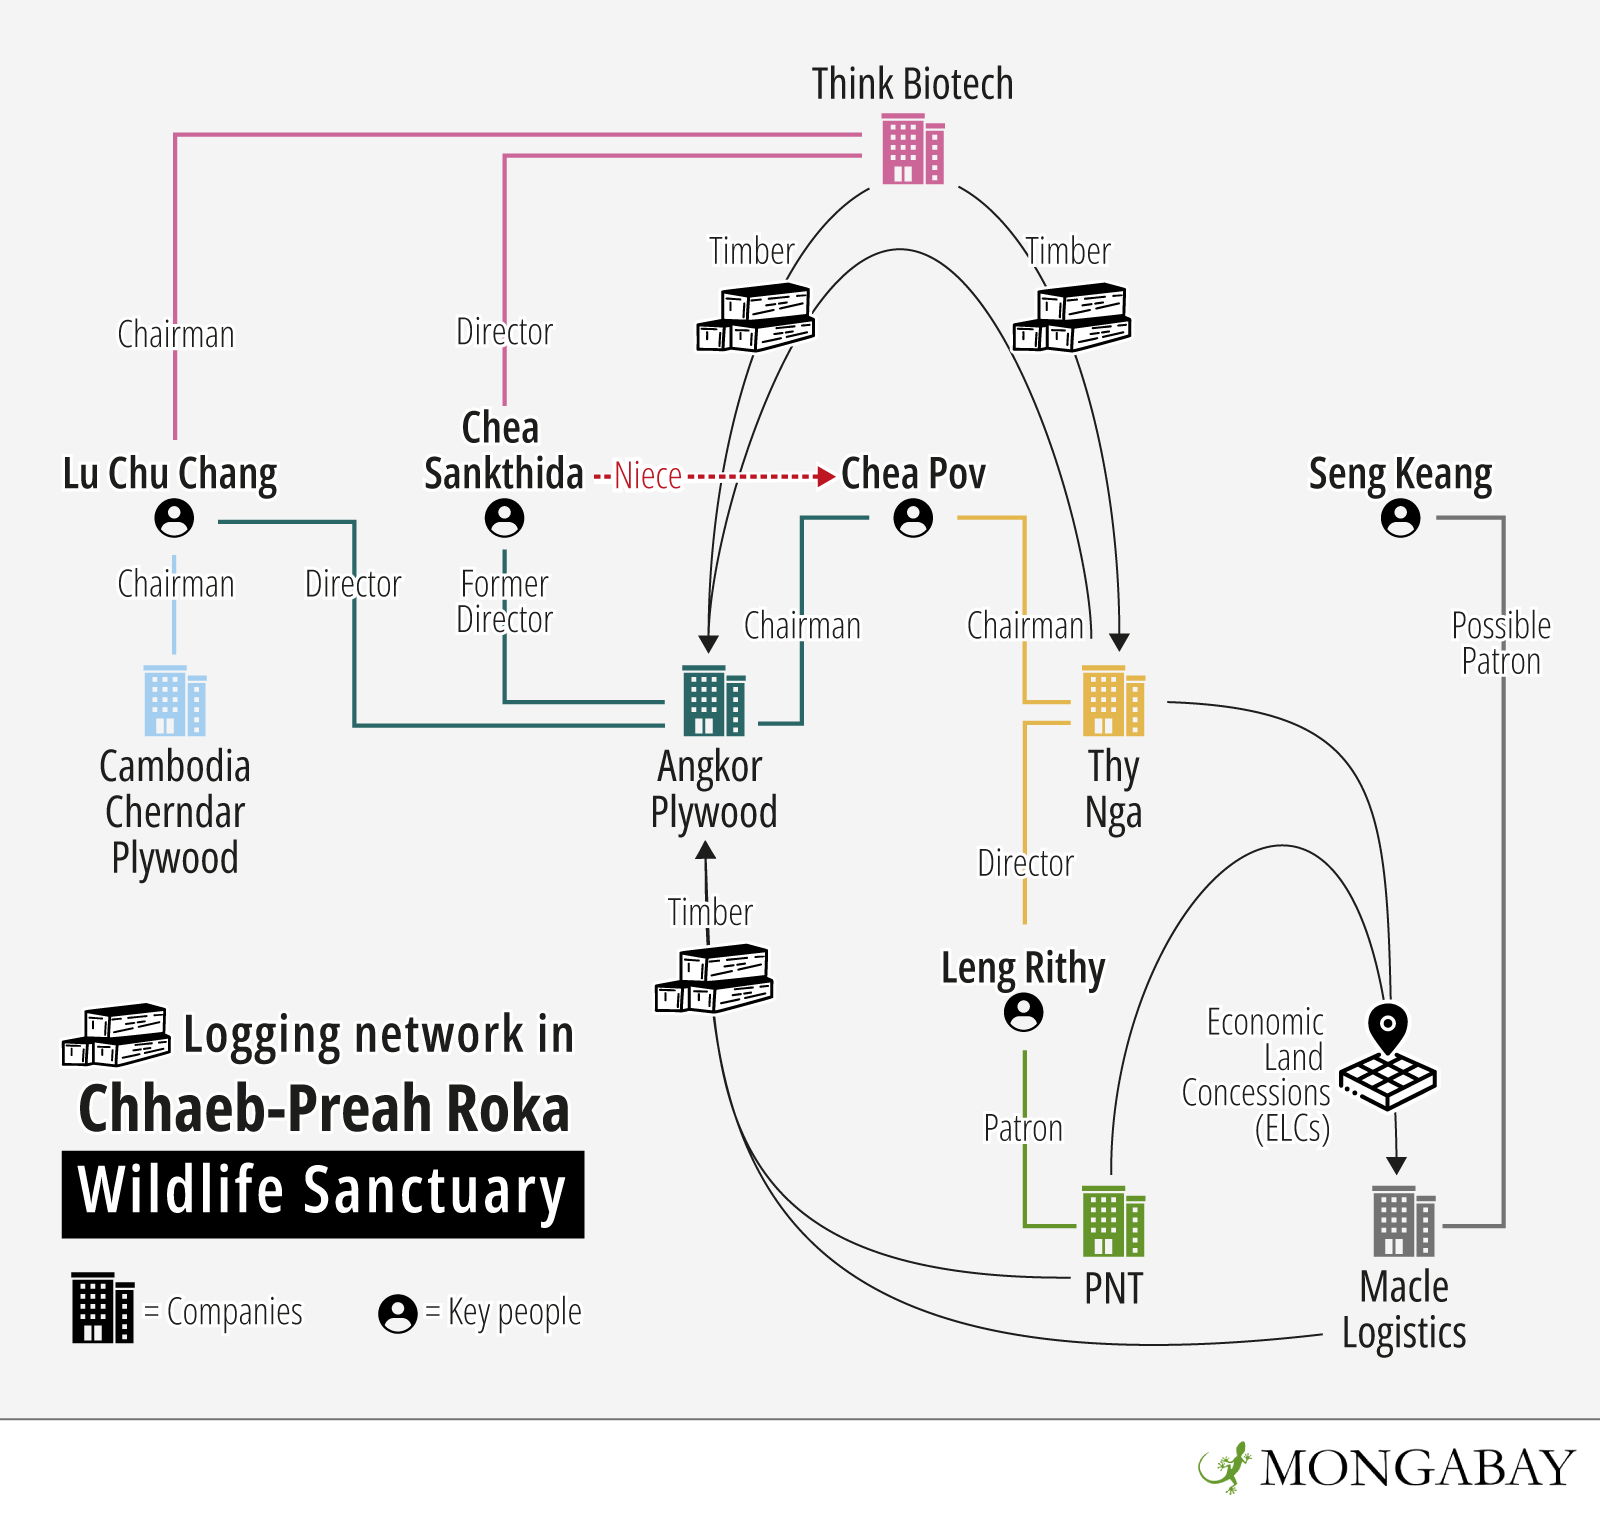 This diagram shows the complexity of the relationships between various companies and individuals who have been found to profit from illegal logging in Chhaeb-Preah Roka Wildlife Sanctuary. Image by Andrés Alegría / Mongabay.